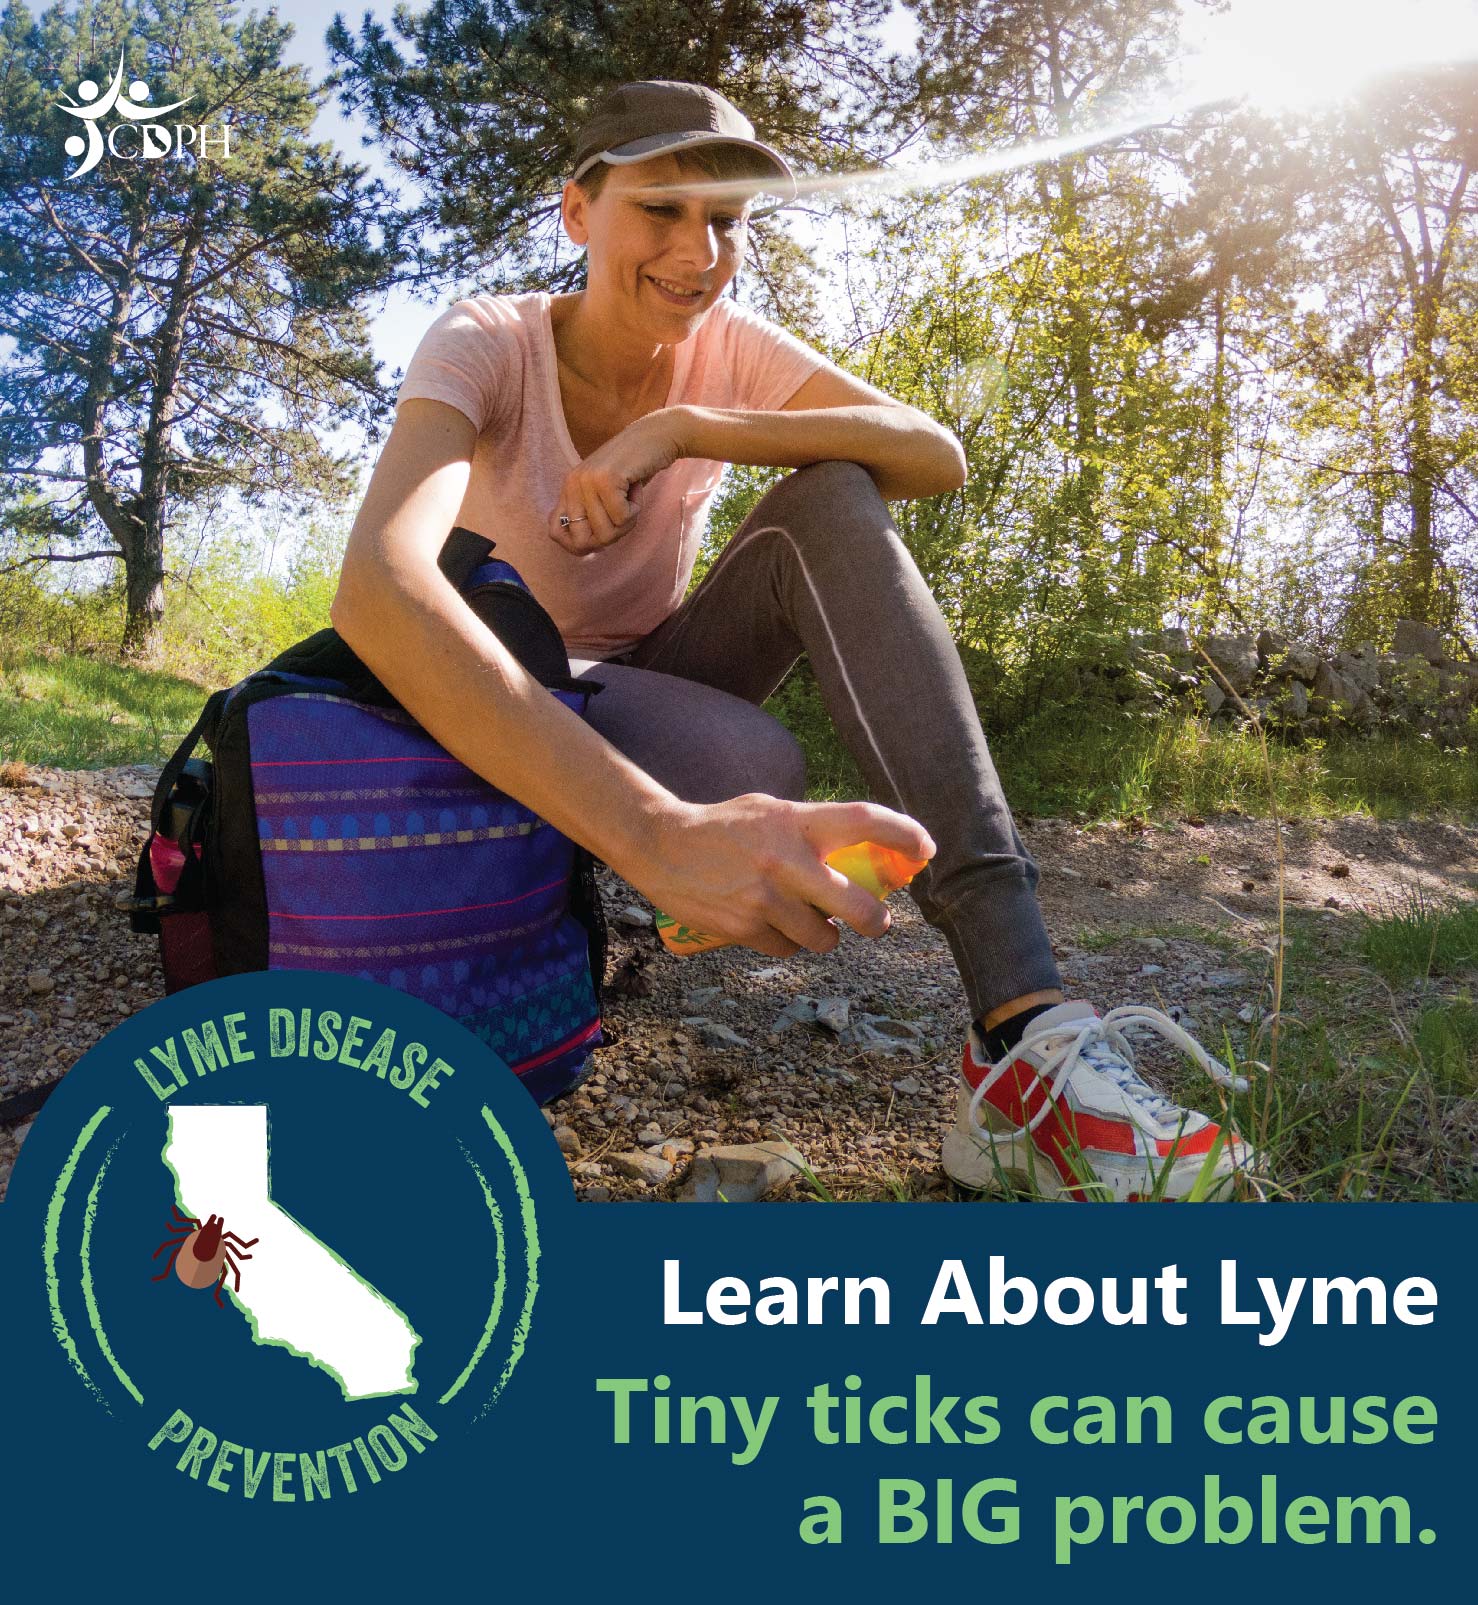 Learn about Lyme tiny ticks can cause a big problem